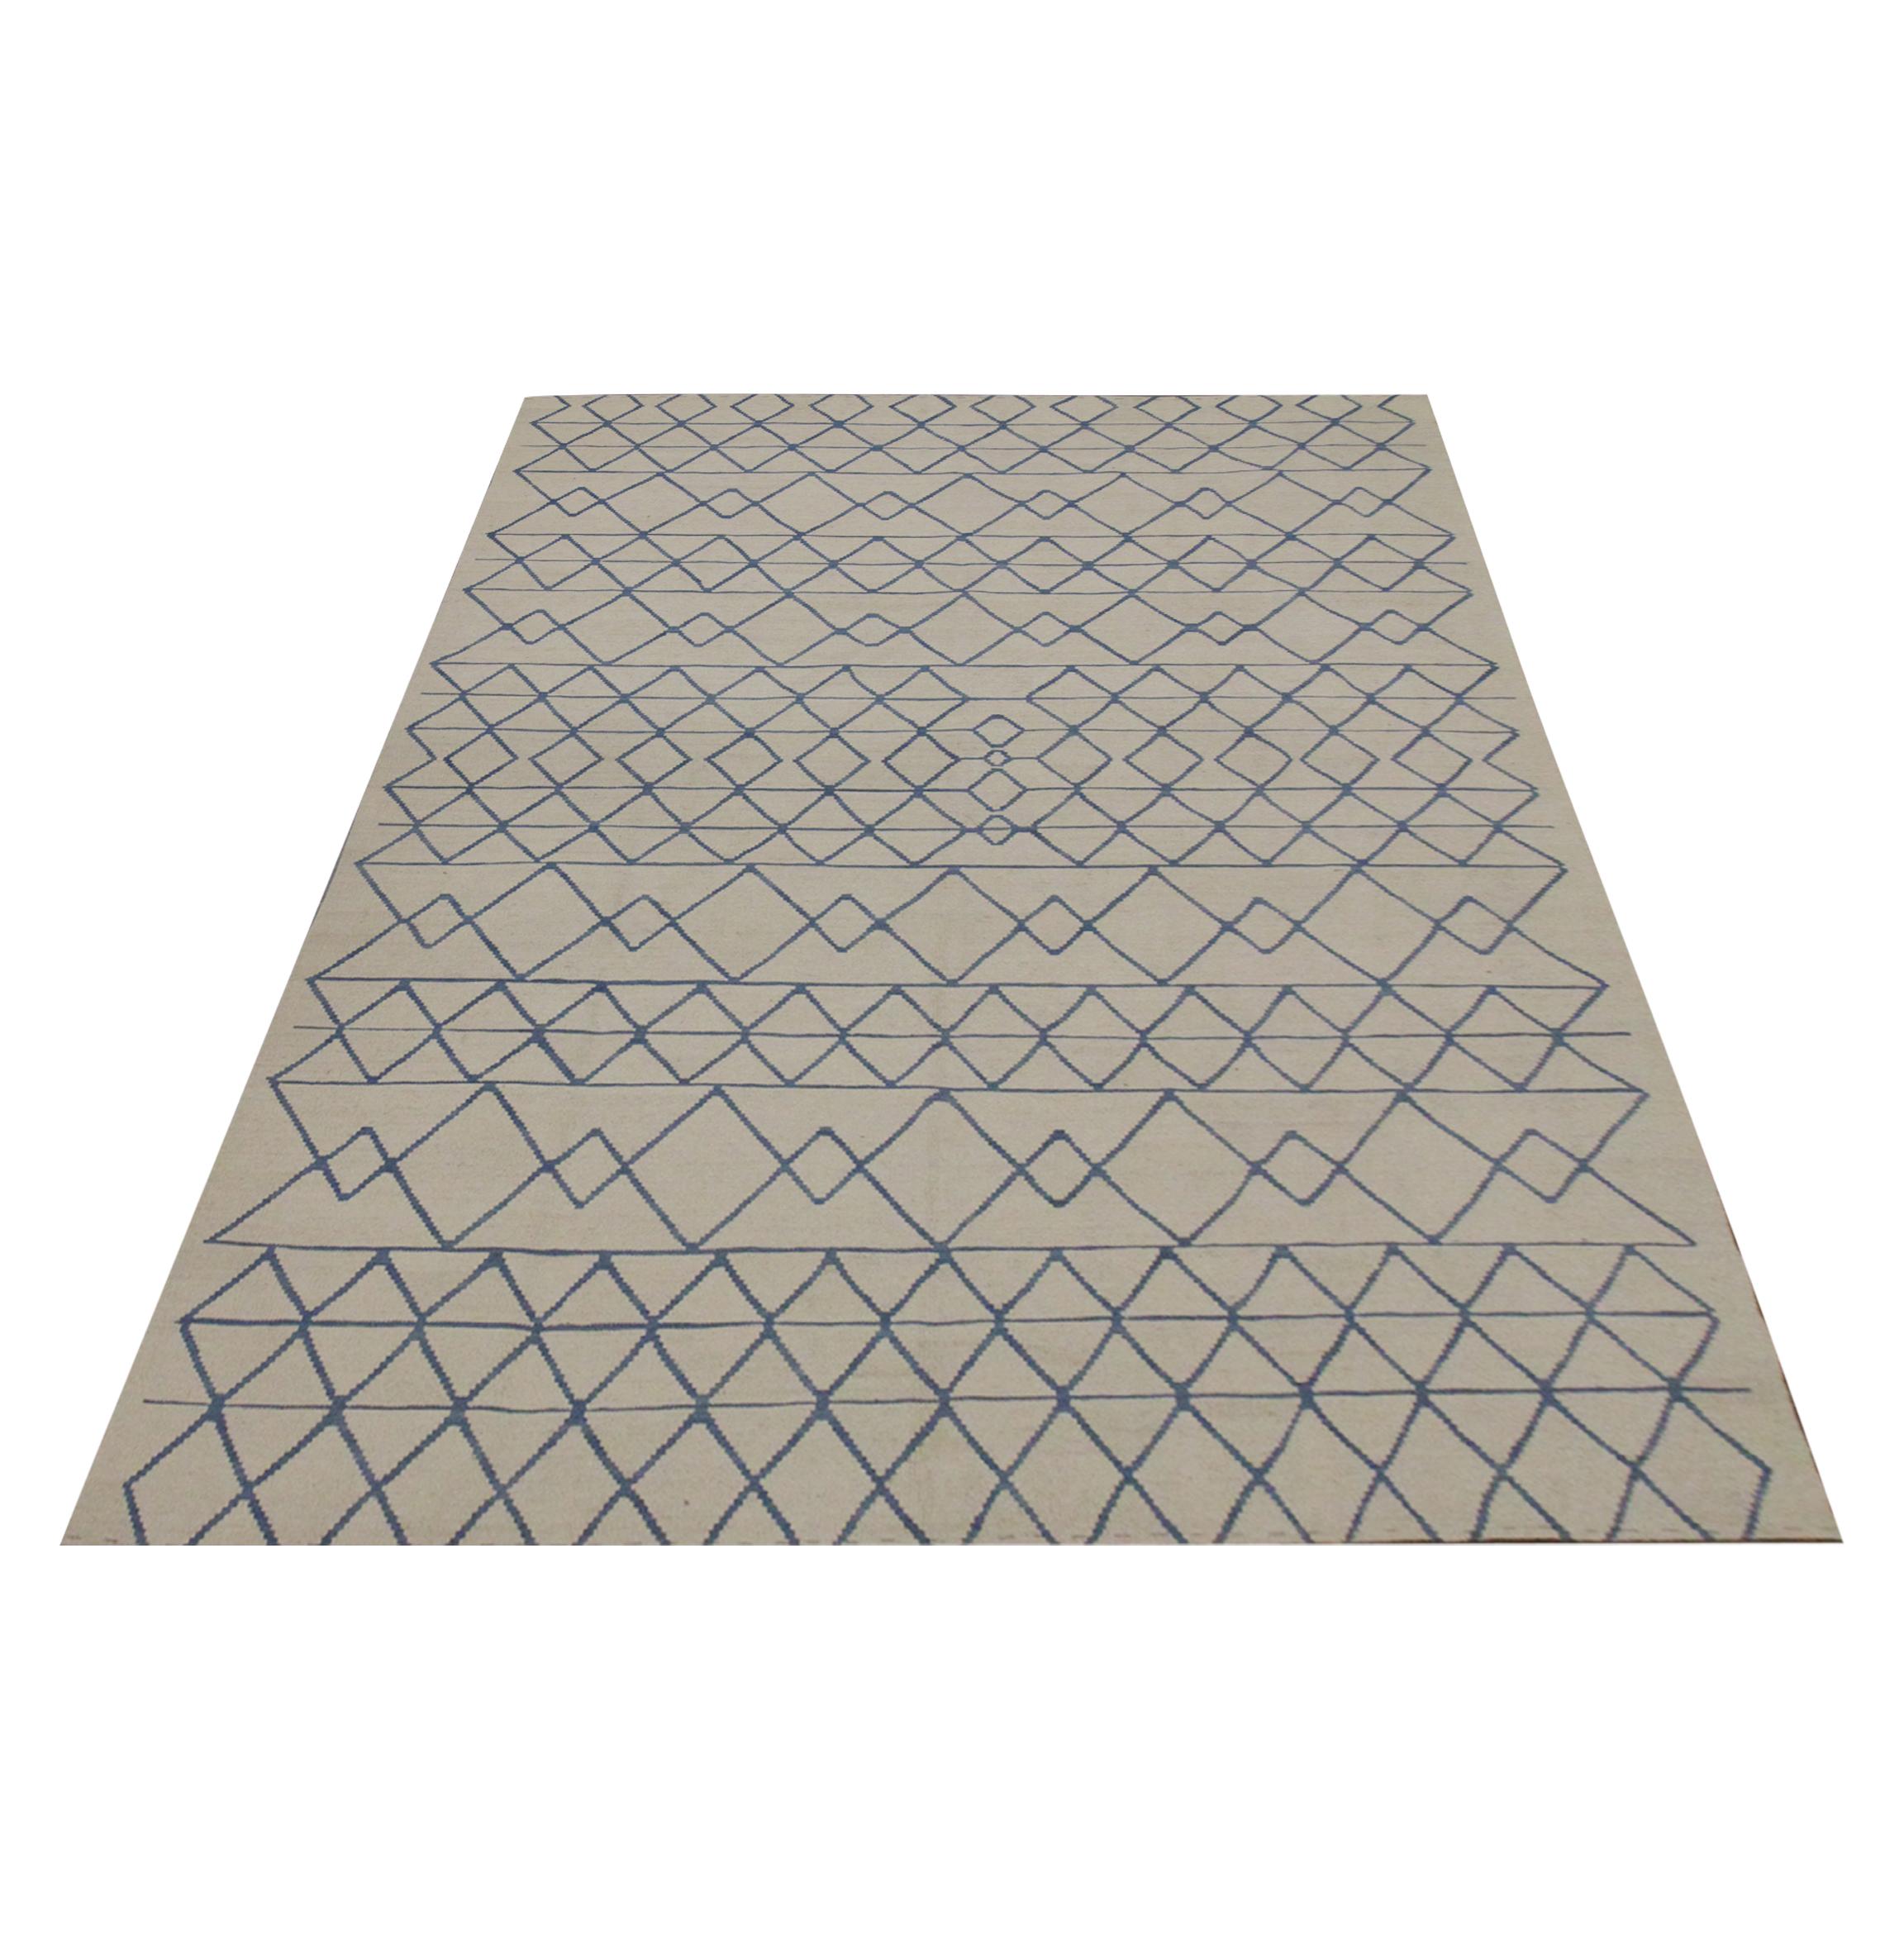 This fine wool Kilim is a New Modern Afghan area rug woven with a simple colour palette of cream and blue. The black accents make up the symmetrical geometric pattern, creating a bold, eye-catching rug. Similar to the Scandinavian design, this